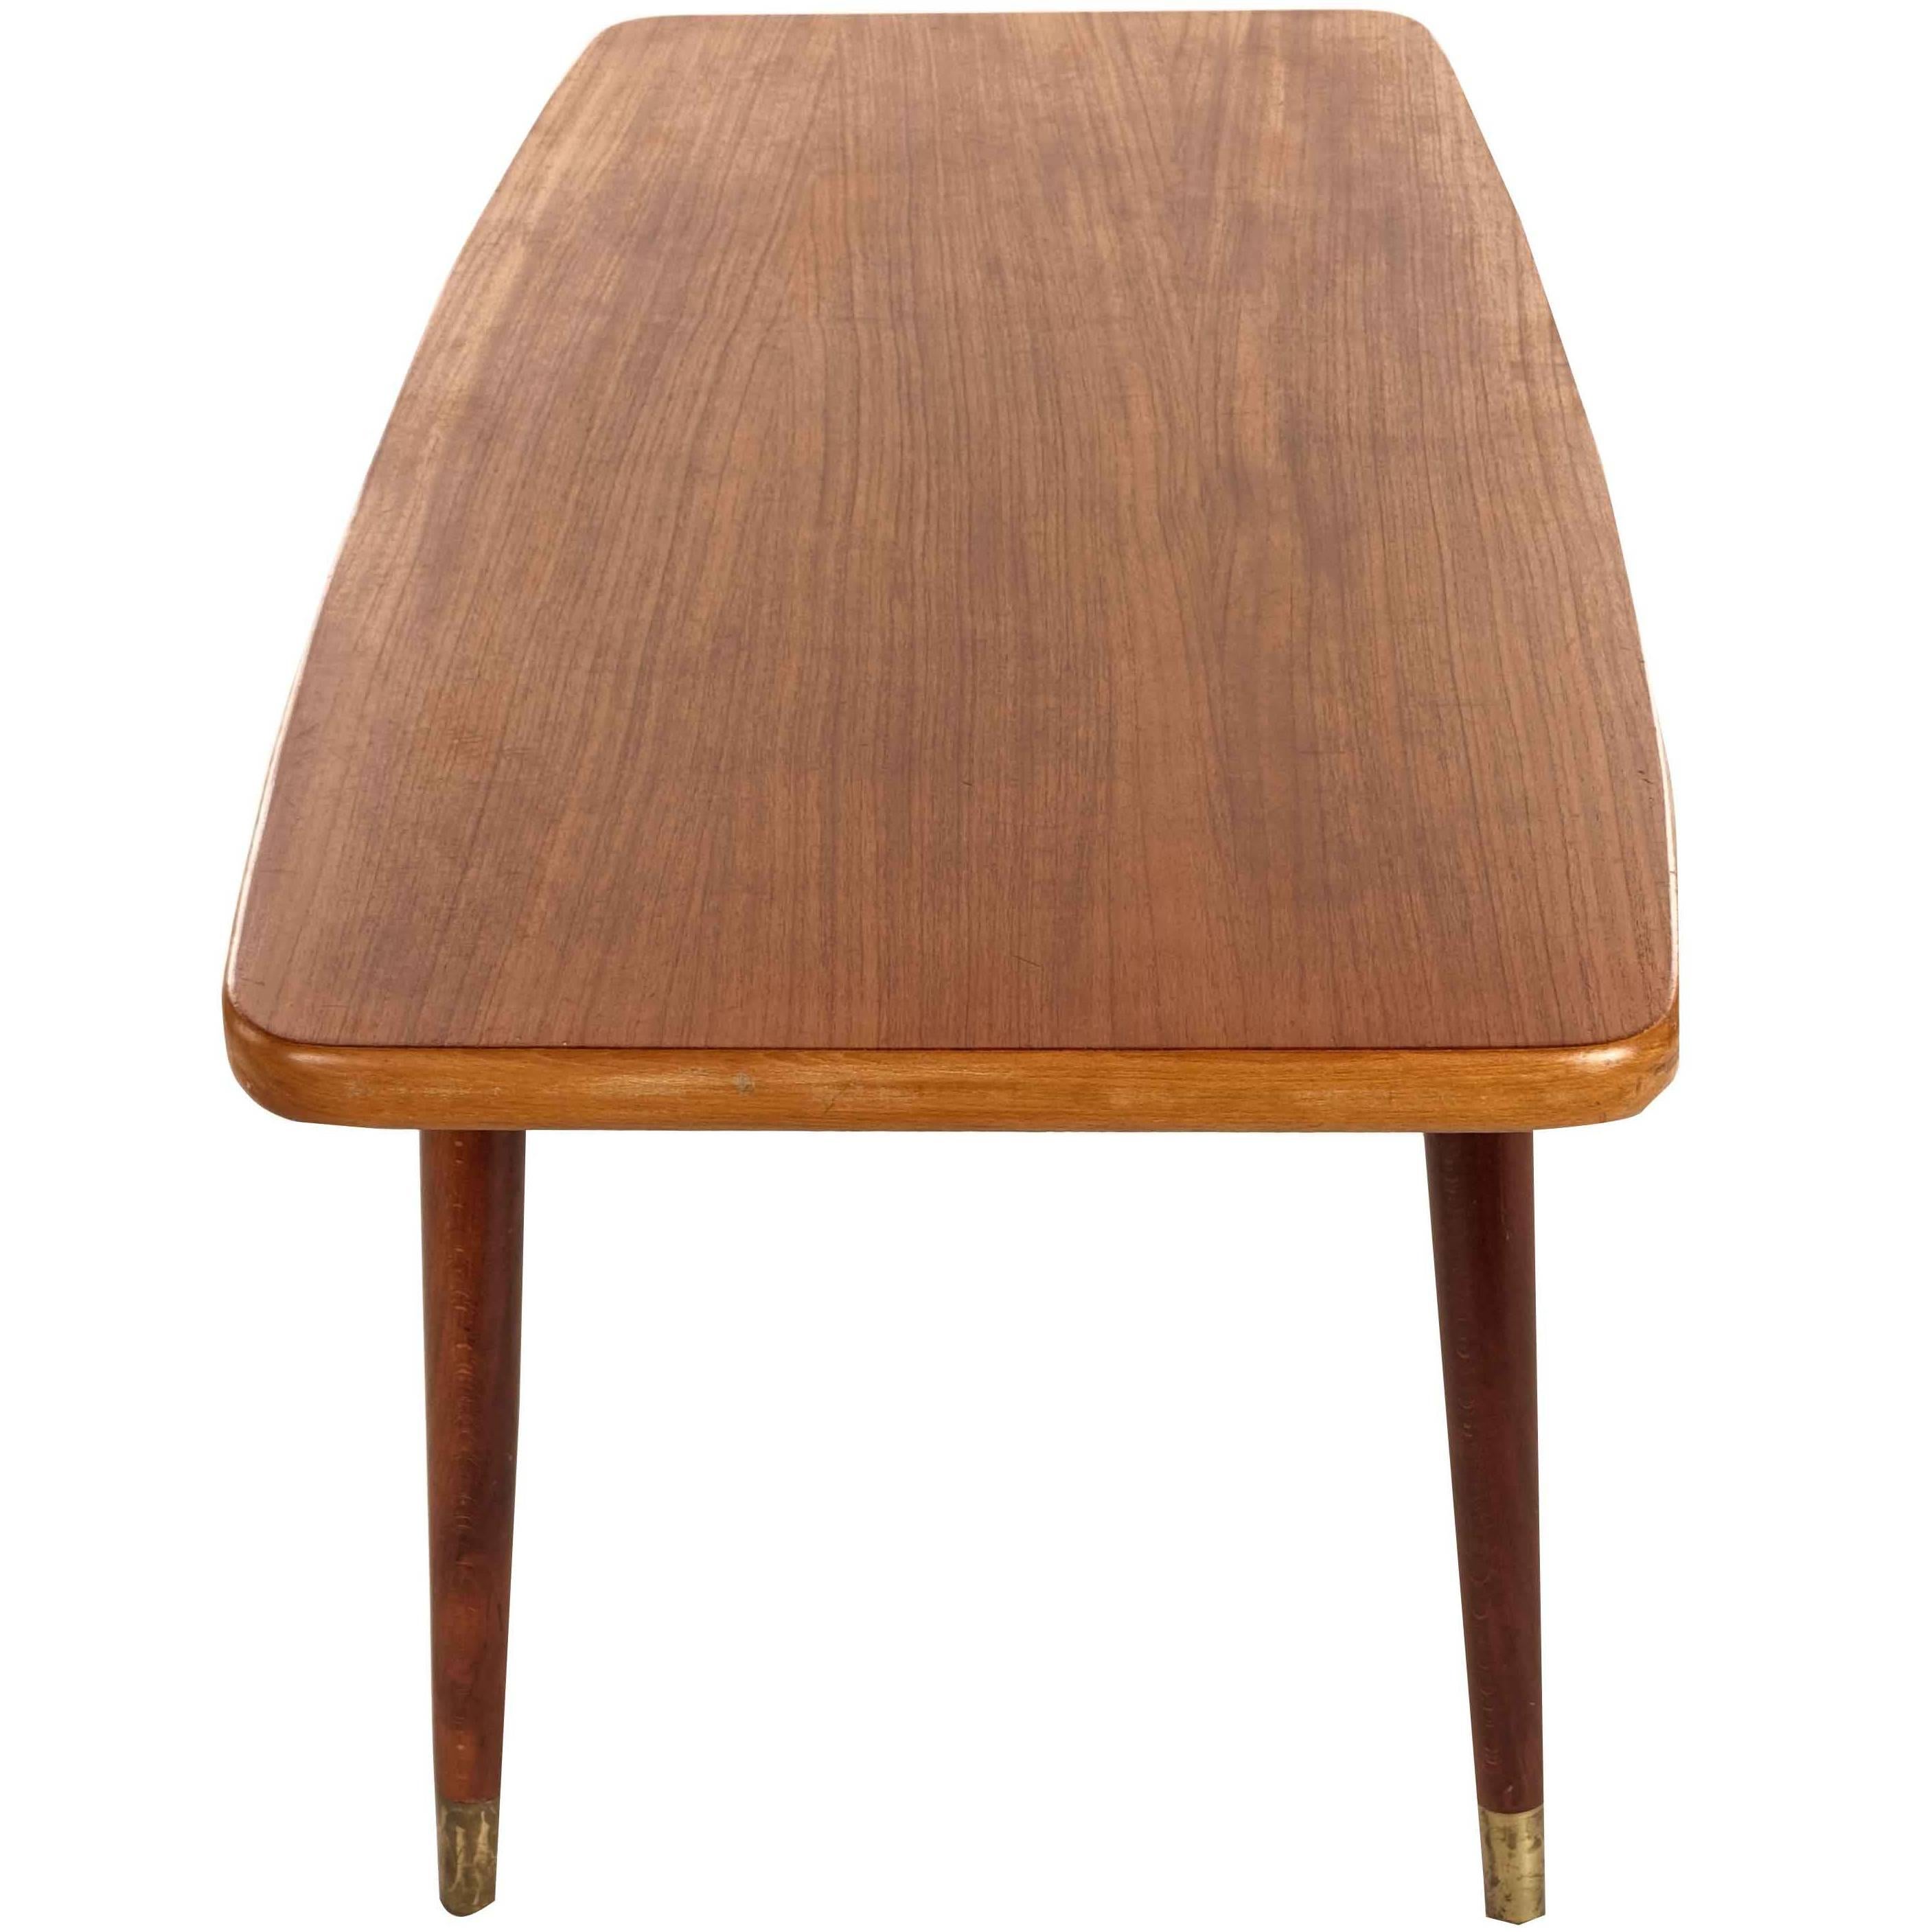 Swedish Coffee Table in Teak and Birch with Brass Capped Legs, 1950s For Sale